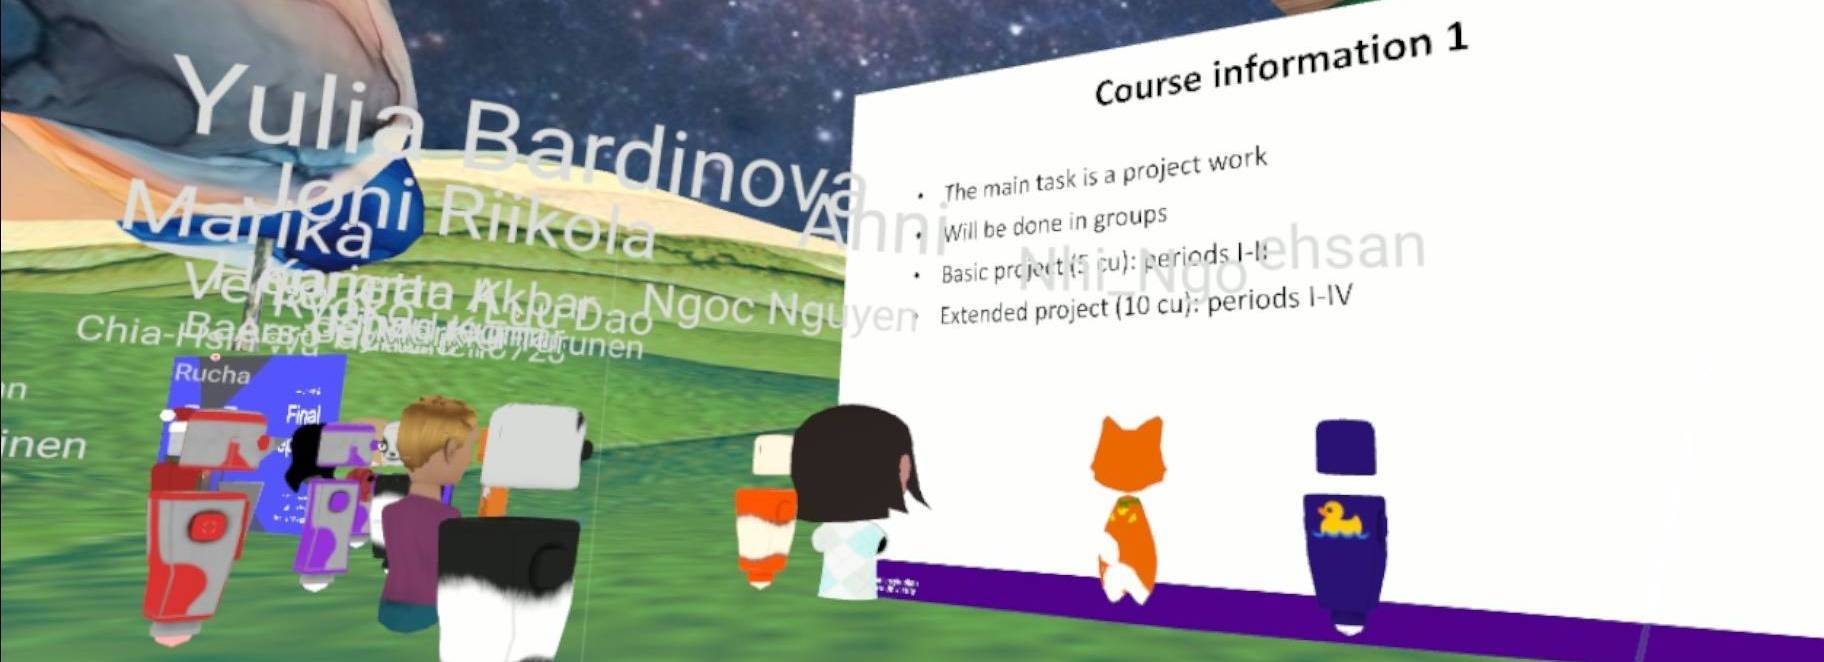 A scene from the virtual teaching environment: a screen with course information slide on the back and avatars with names representing the participants in front of it.